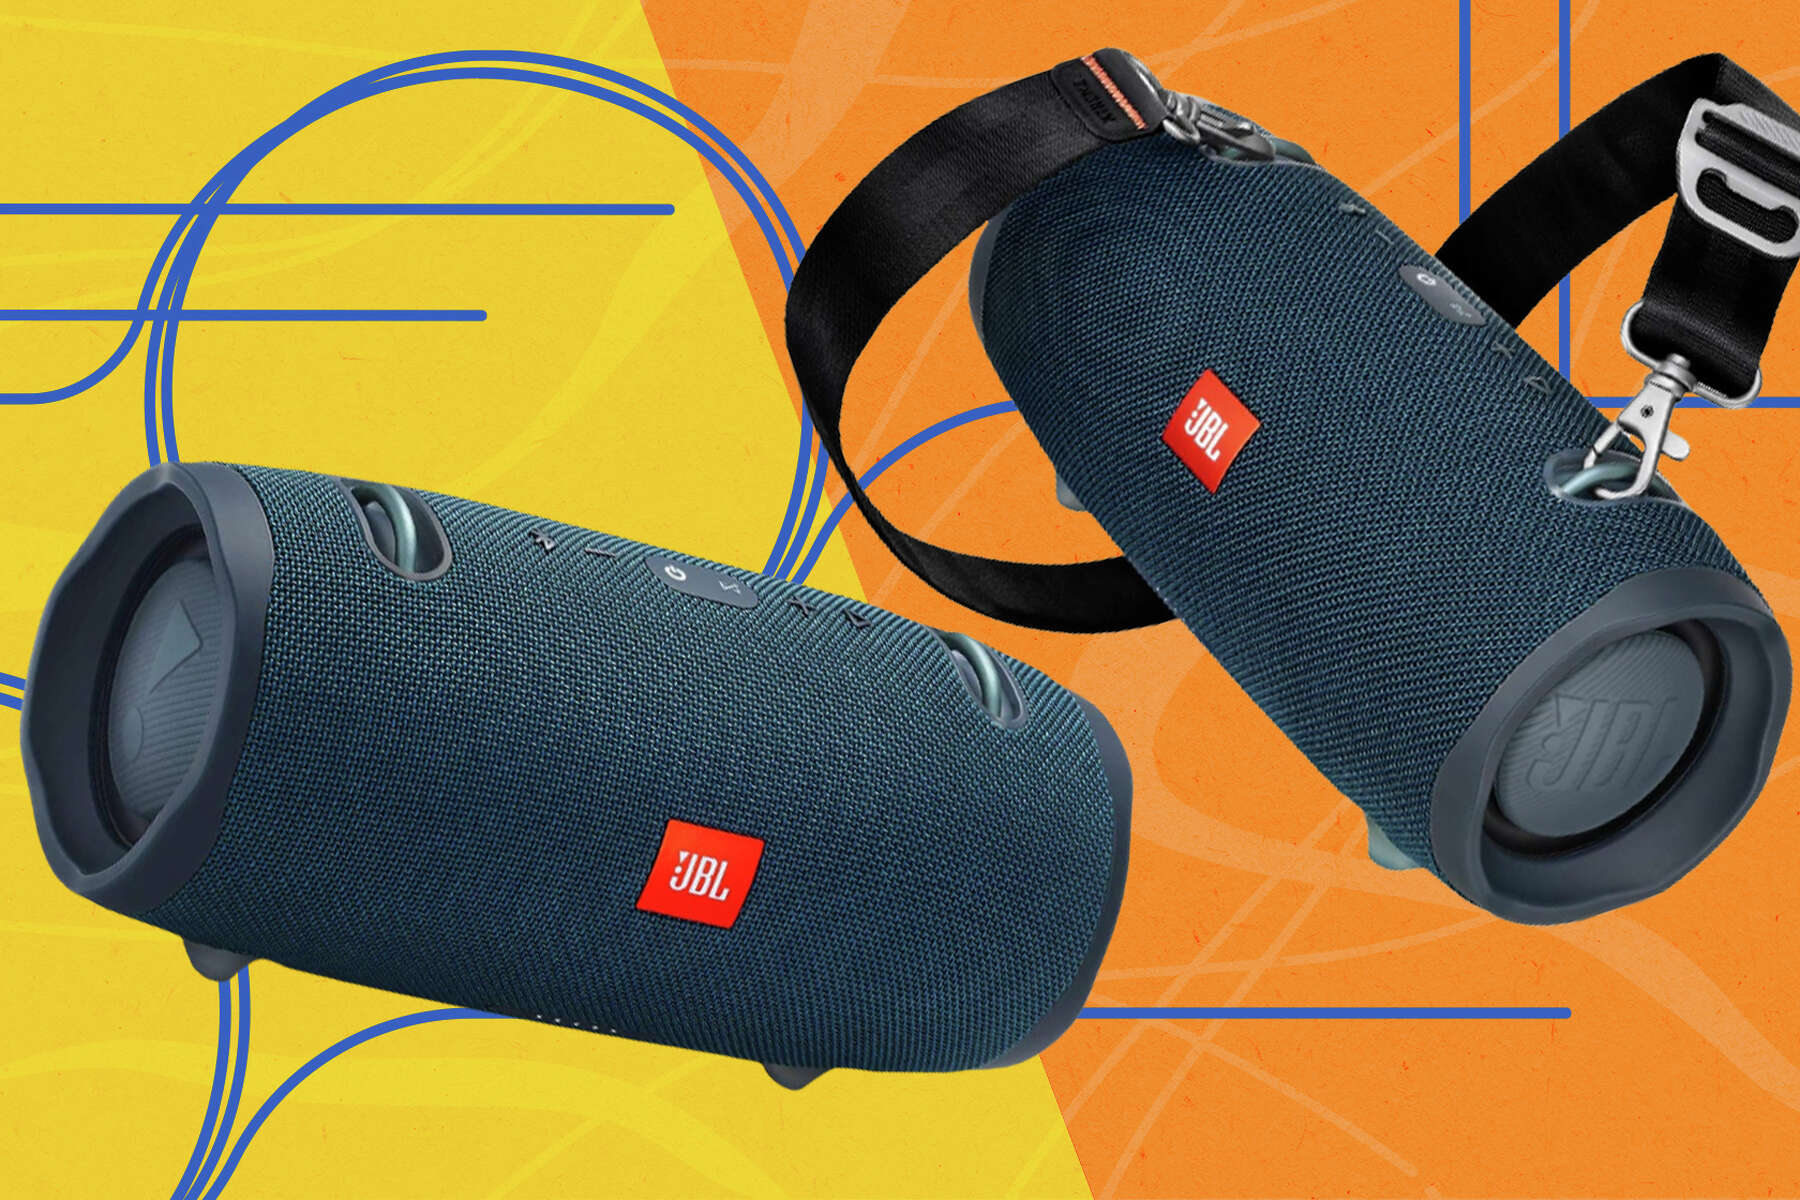 This JBL speaker is 55% off, thanks to Amazon